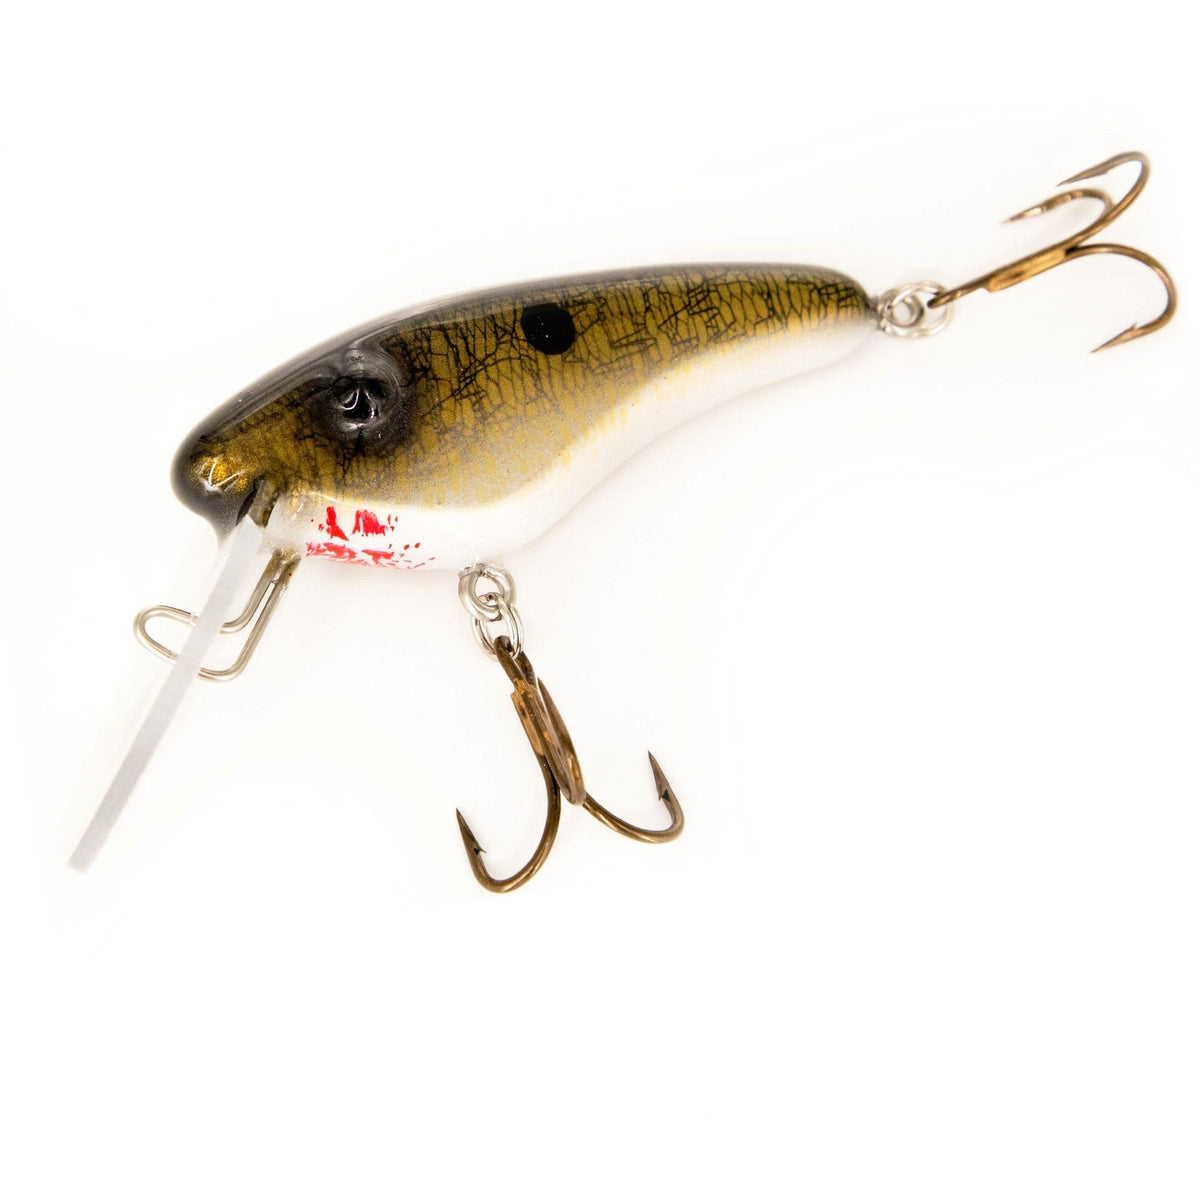 View of Crankbaits Llungen Lures Stray Cat Crankbait Gold Shimmer Shad available at EZOKO Pike and Musky Shop